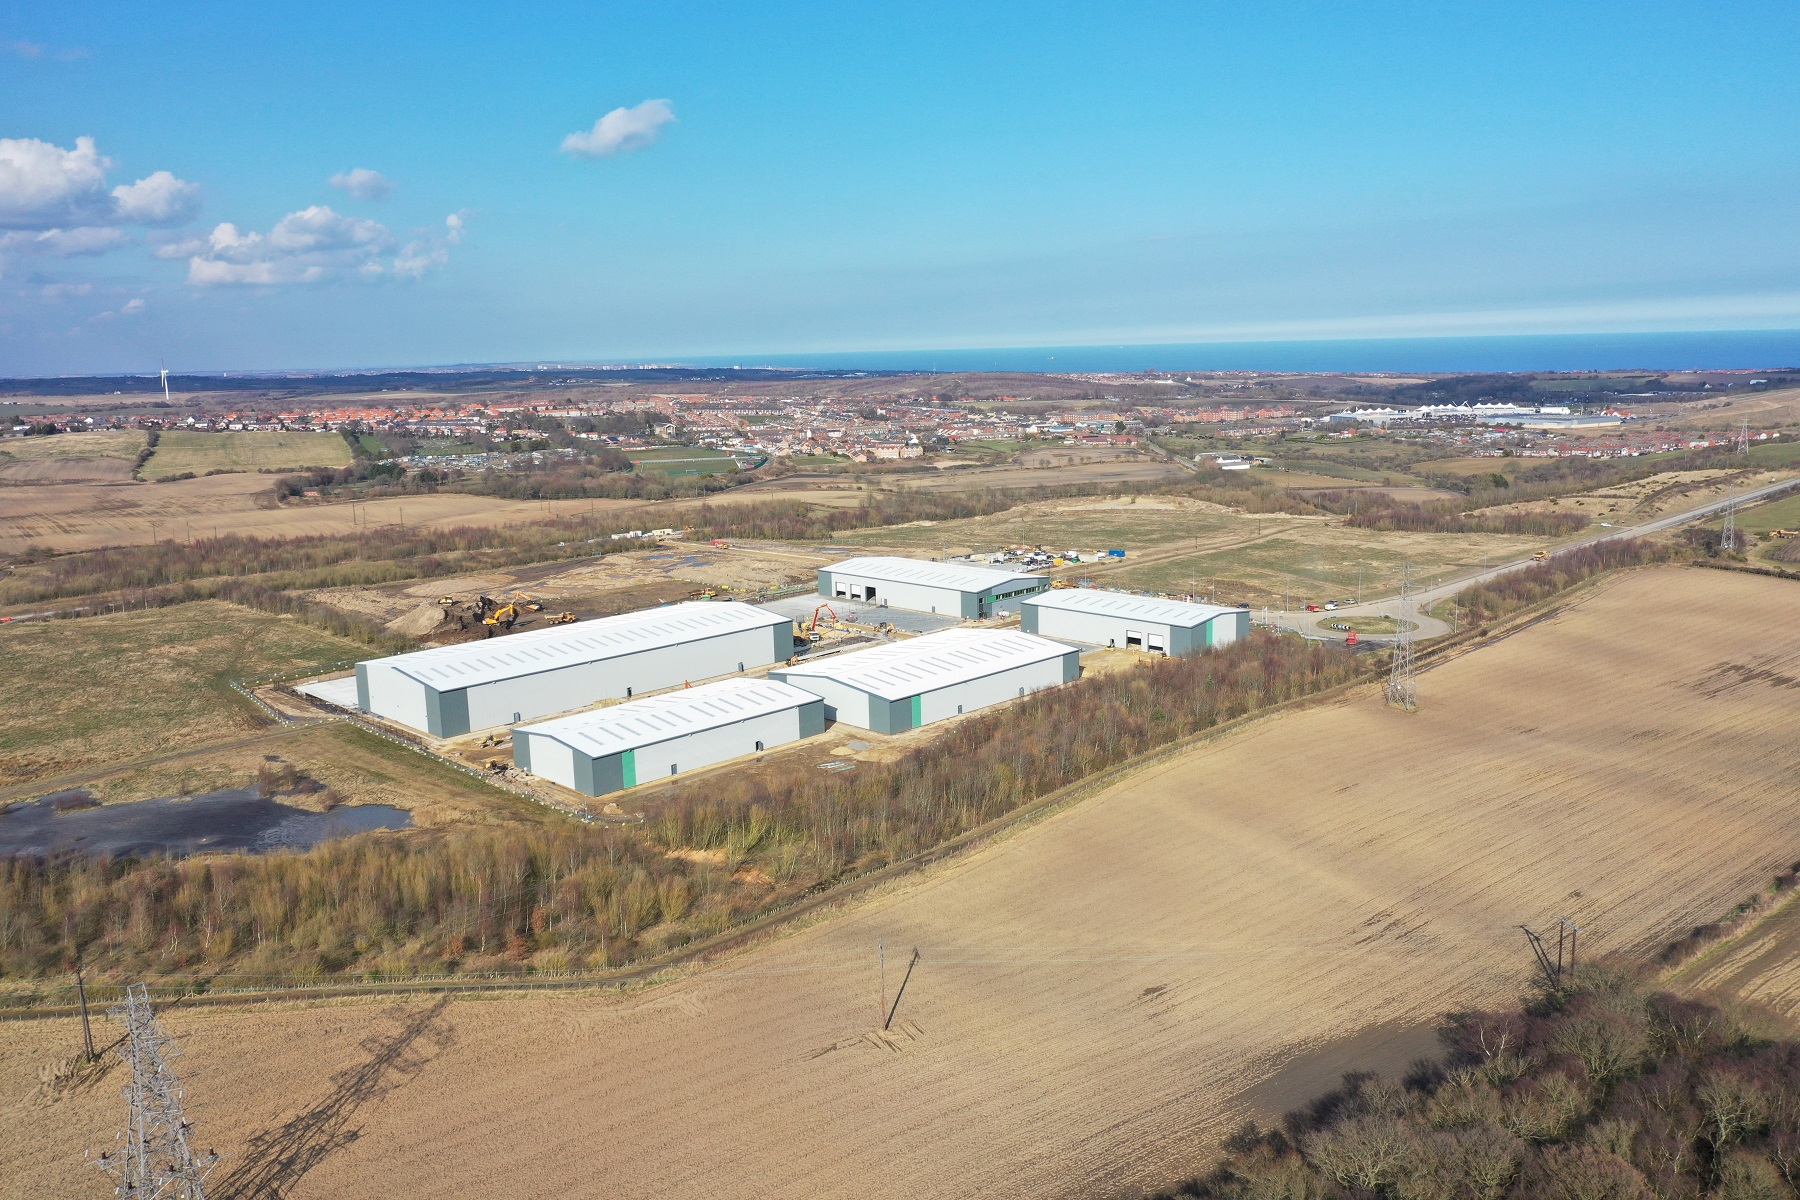 Jade Business Park phase one offers 155,000 sq ft of industrial space